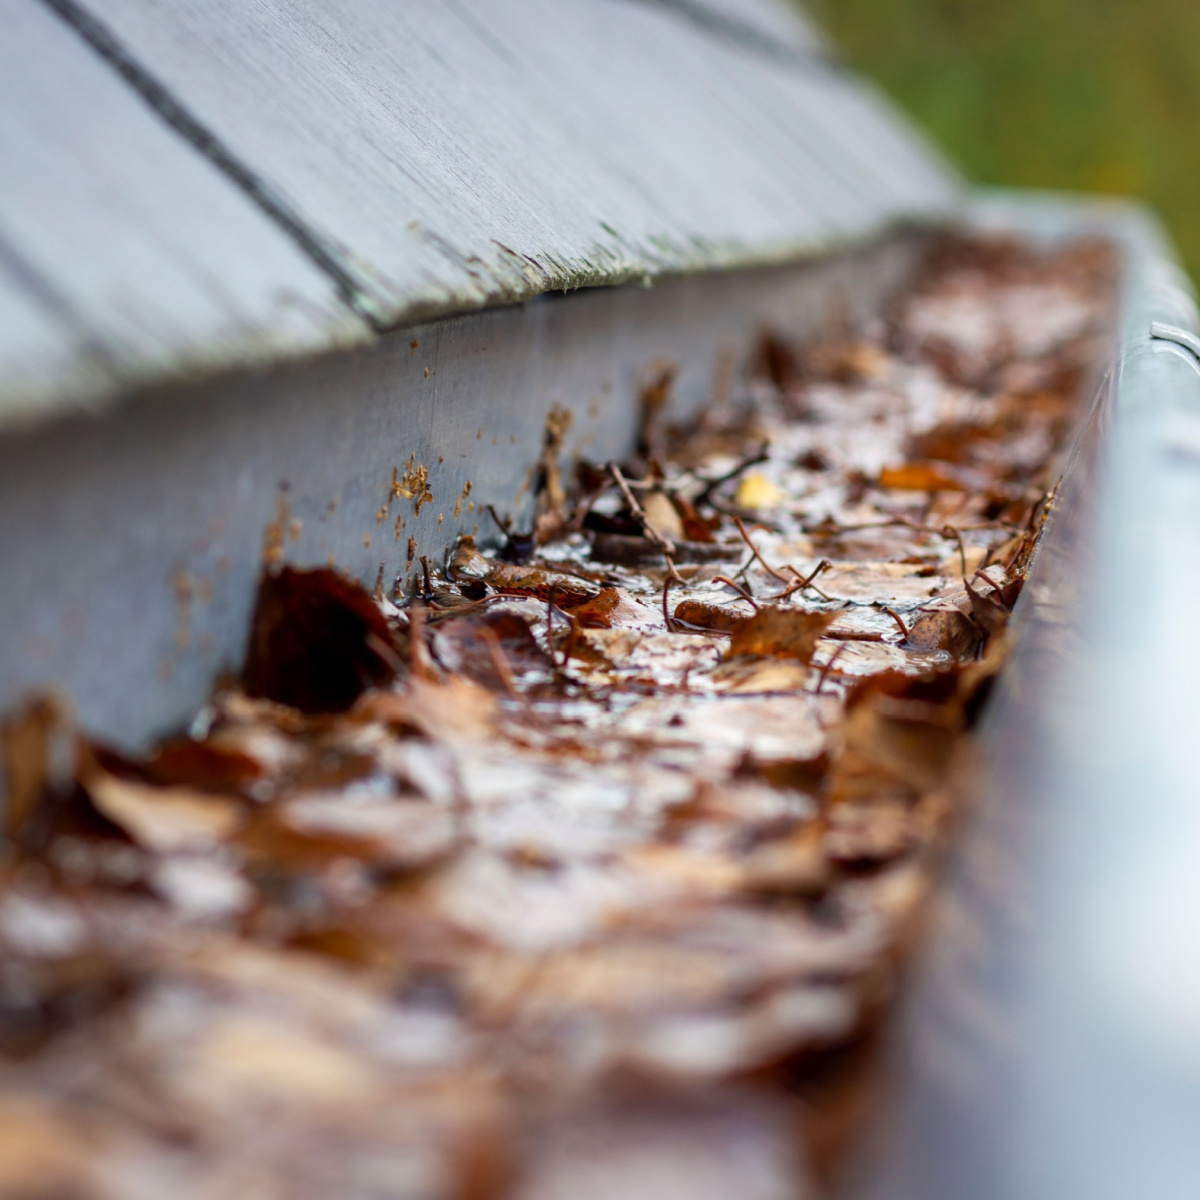 Gutters clogged by storm debris